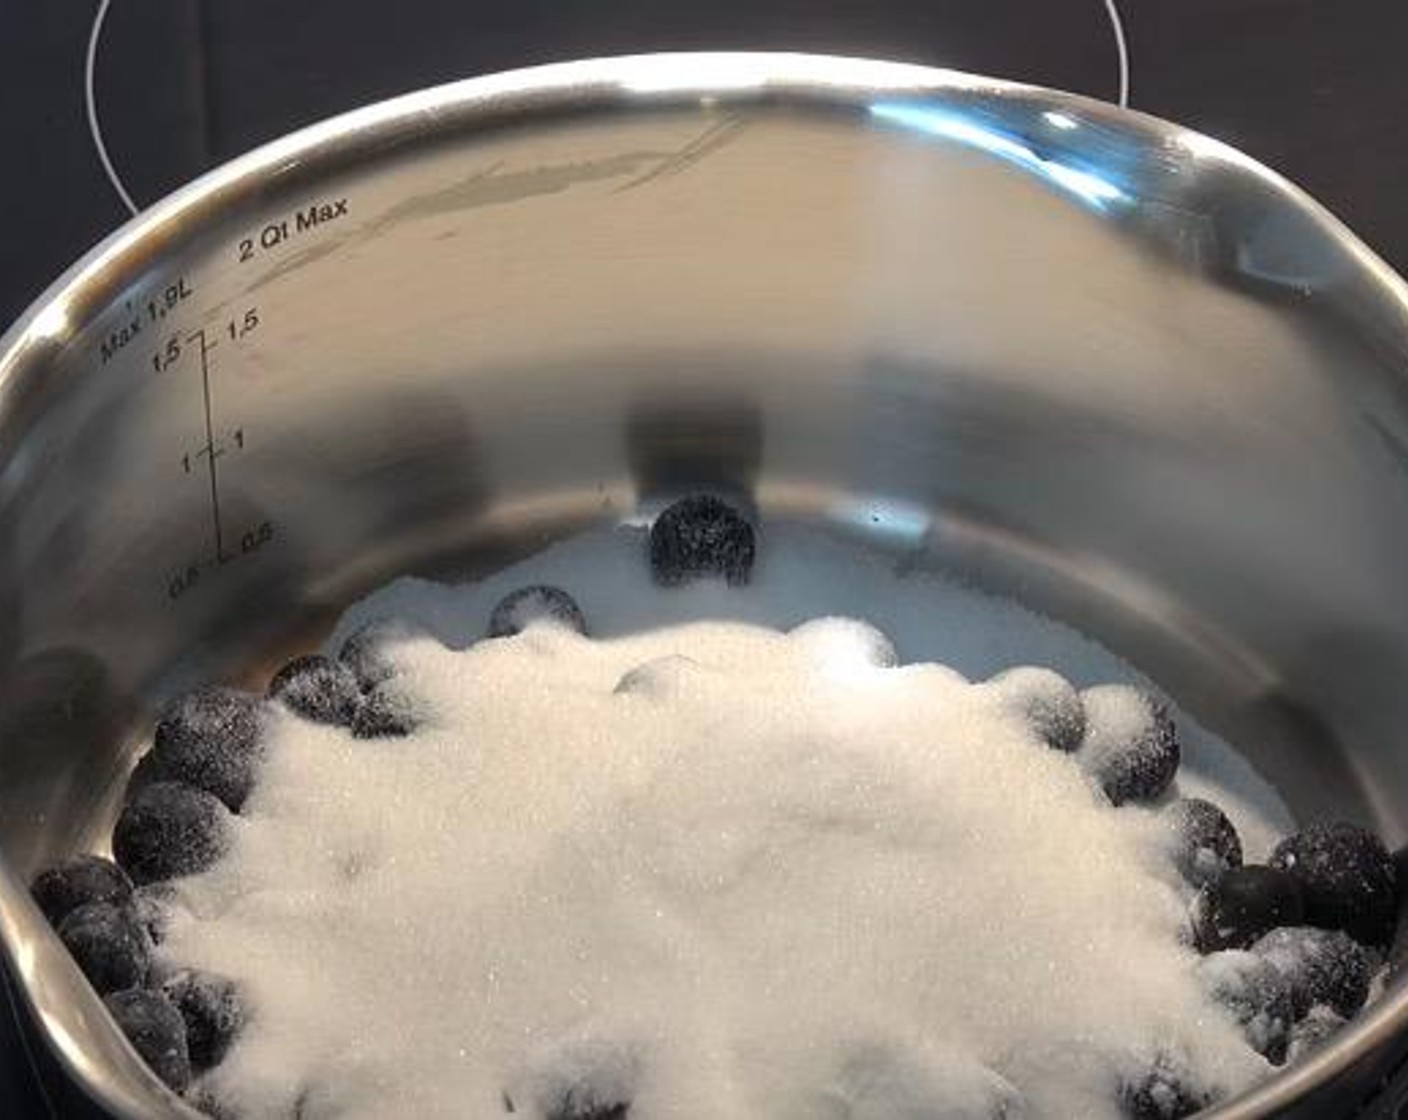 step 1 In a small saucepan, add Fresh Blueberries (1 1/3 cups), Corn Flour (1 Tbsp), Caster Sugar (3/4 cup) and Water (1/2 cup). Over a low heat and stirring occasionally, cook until mixture becomes thick and pulpy. Set aside to cool.